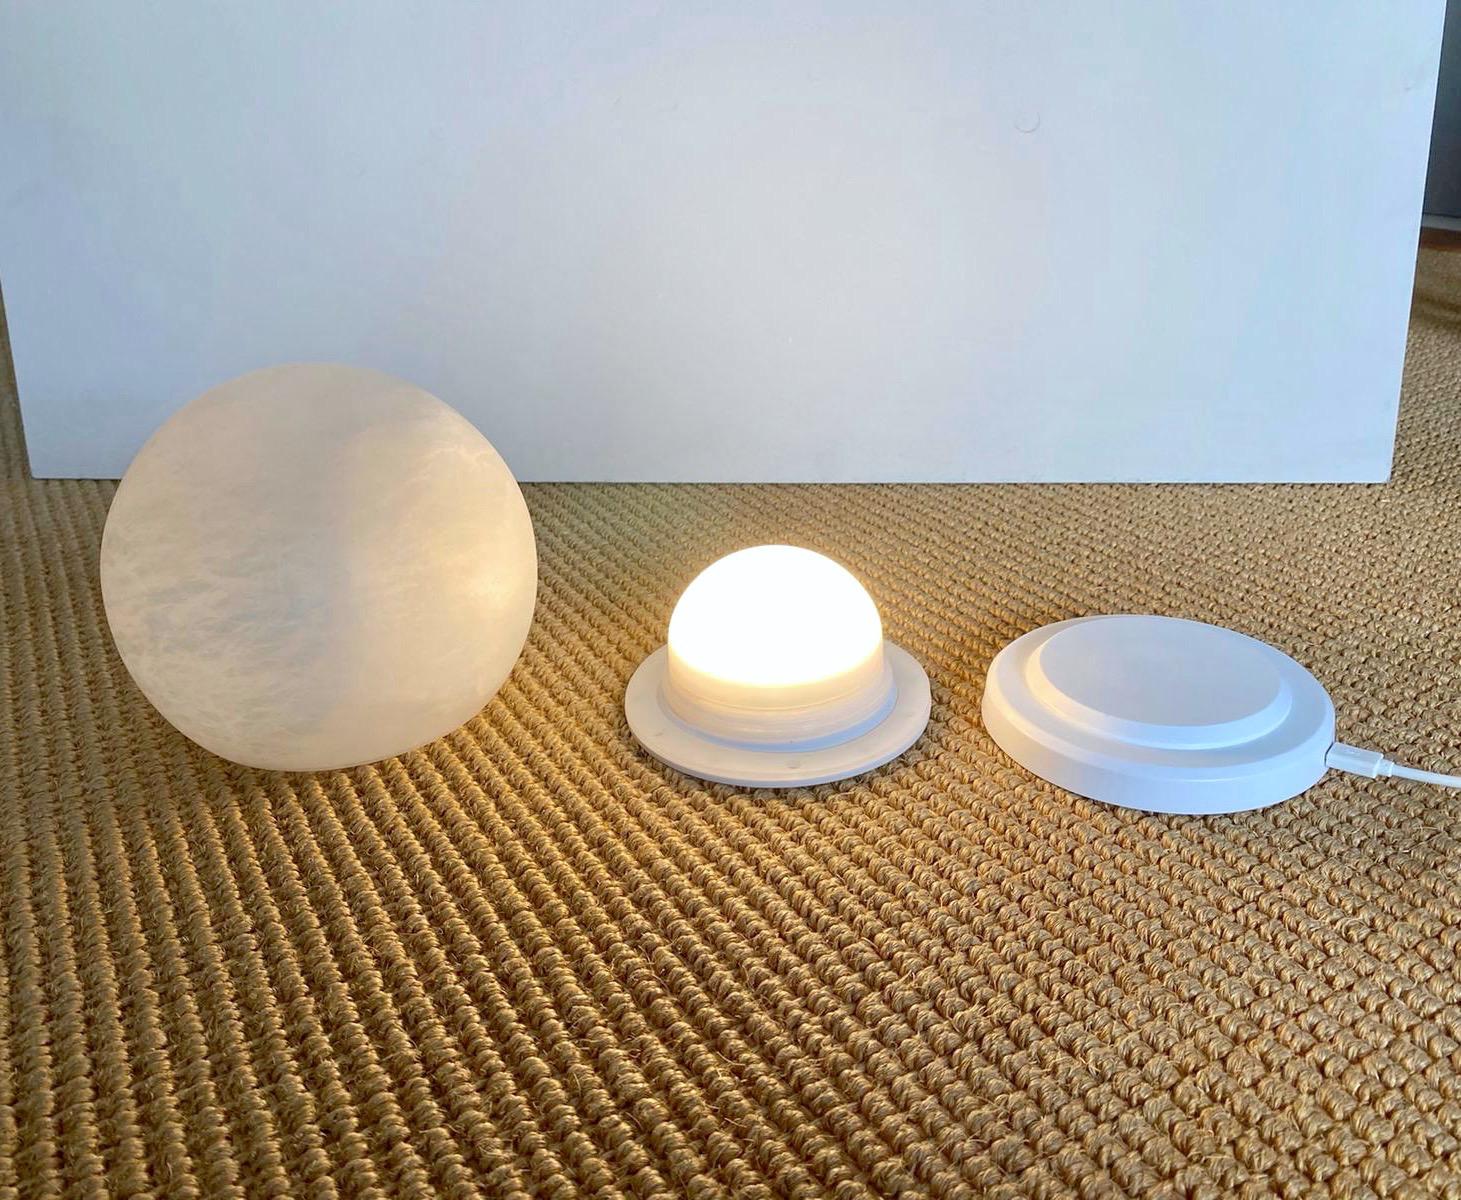 Hand-Crafted Bespoke Italian Minimalist White Alabaster Moon Wireless Round Table/Desk Lamp For Sale